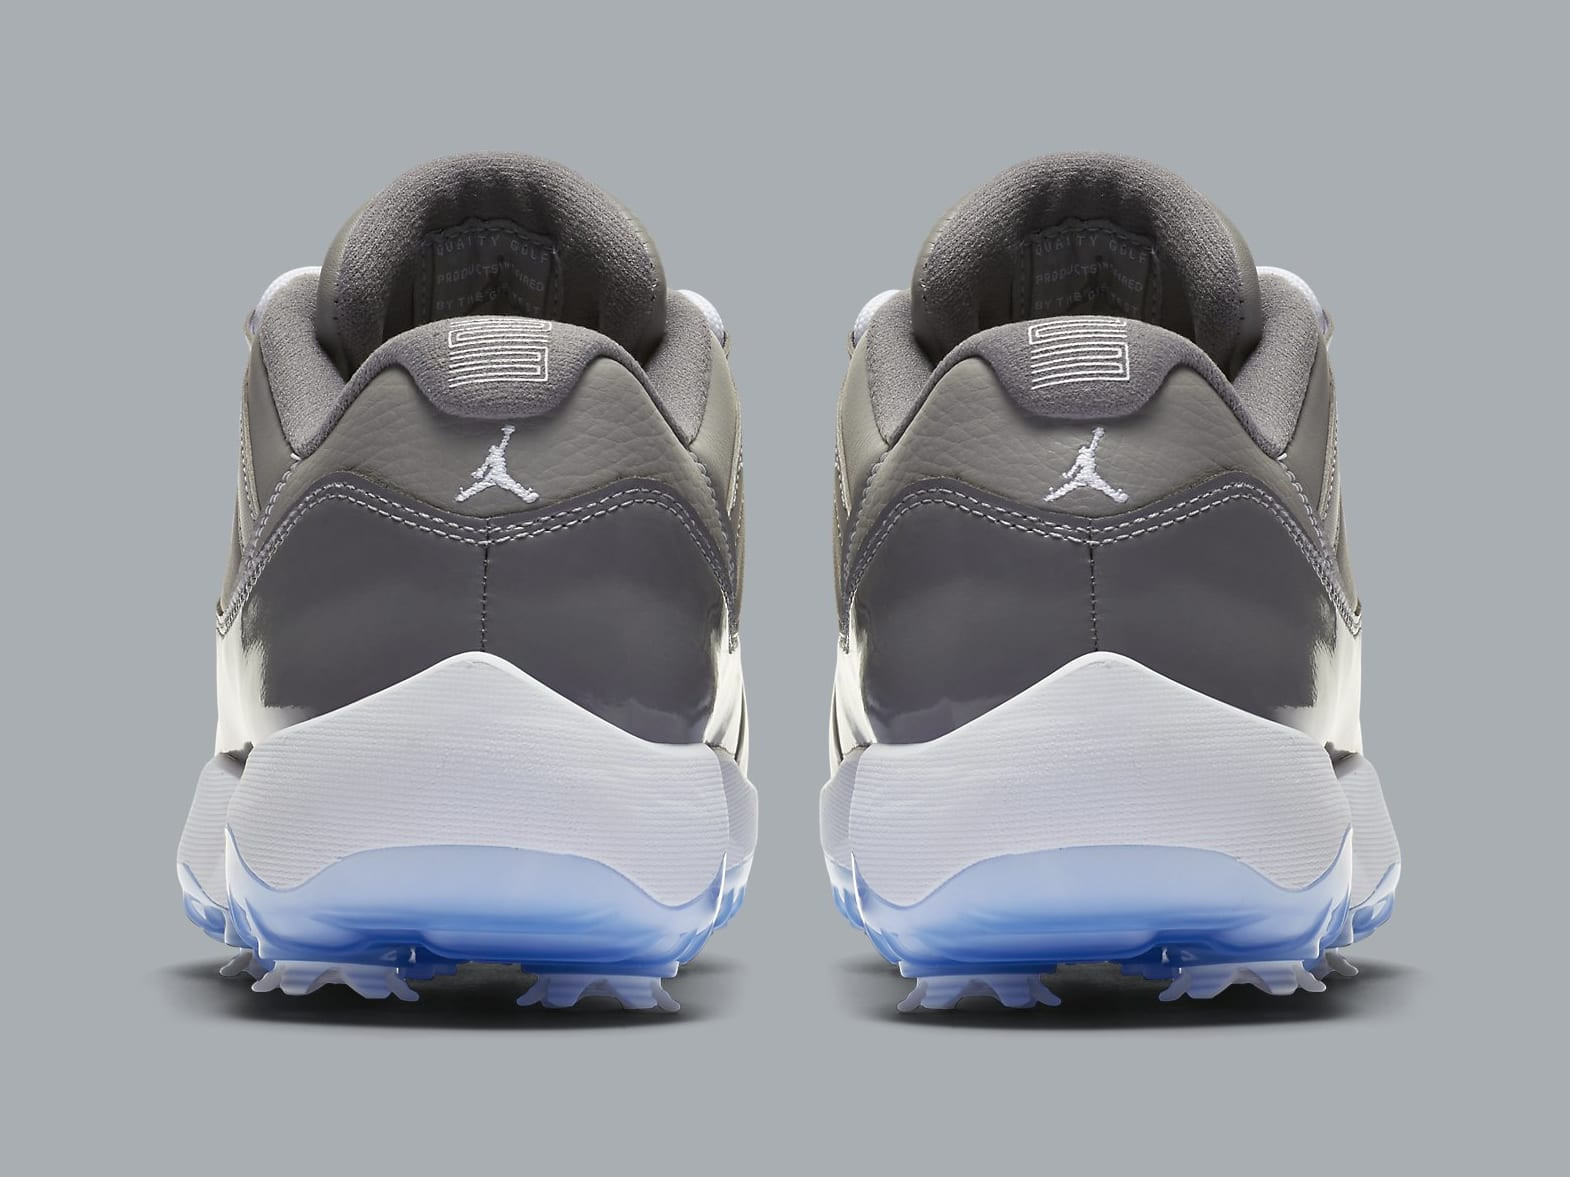 Air Jordan 11 Low “Cool Grey” Given Golf Show Makeover: Details